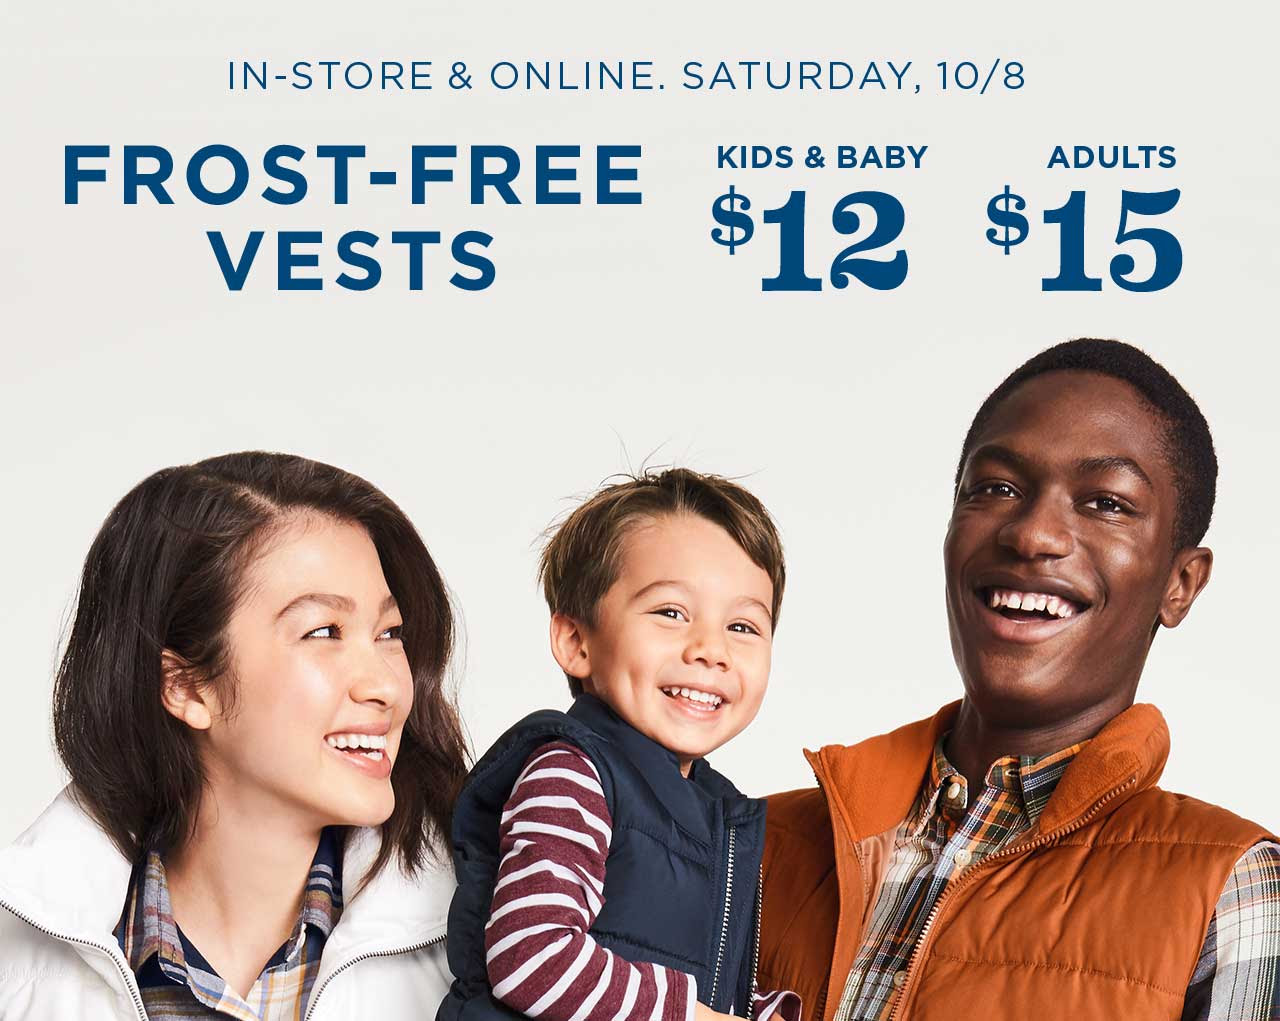 IN-STORE & ONLINE. SATURDAY, 10/8 | FROST-FREE VESTS | KIDS & BABY $12 | ADULTS $15